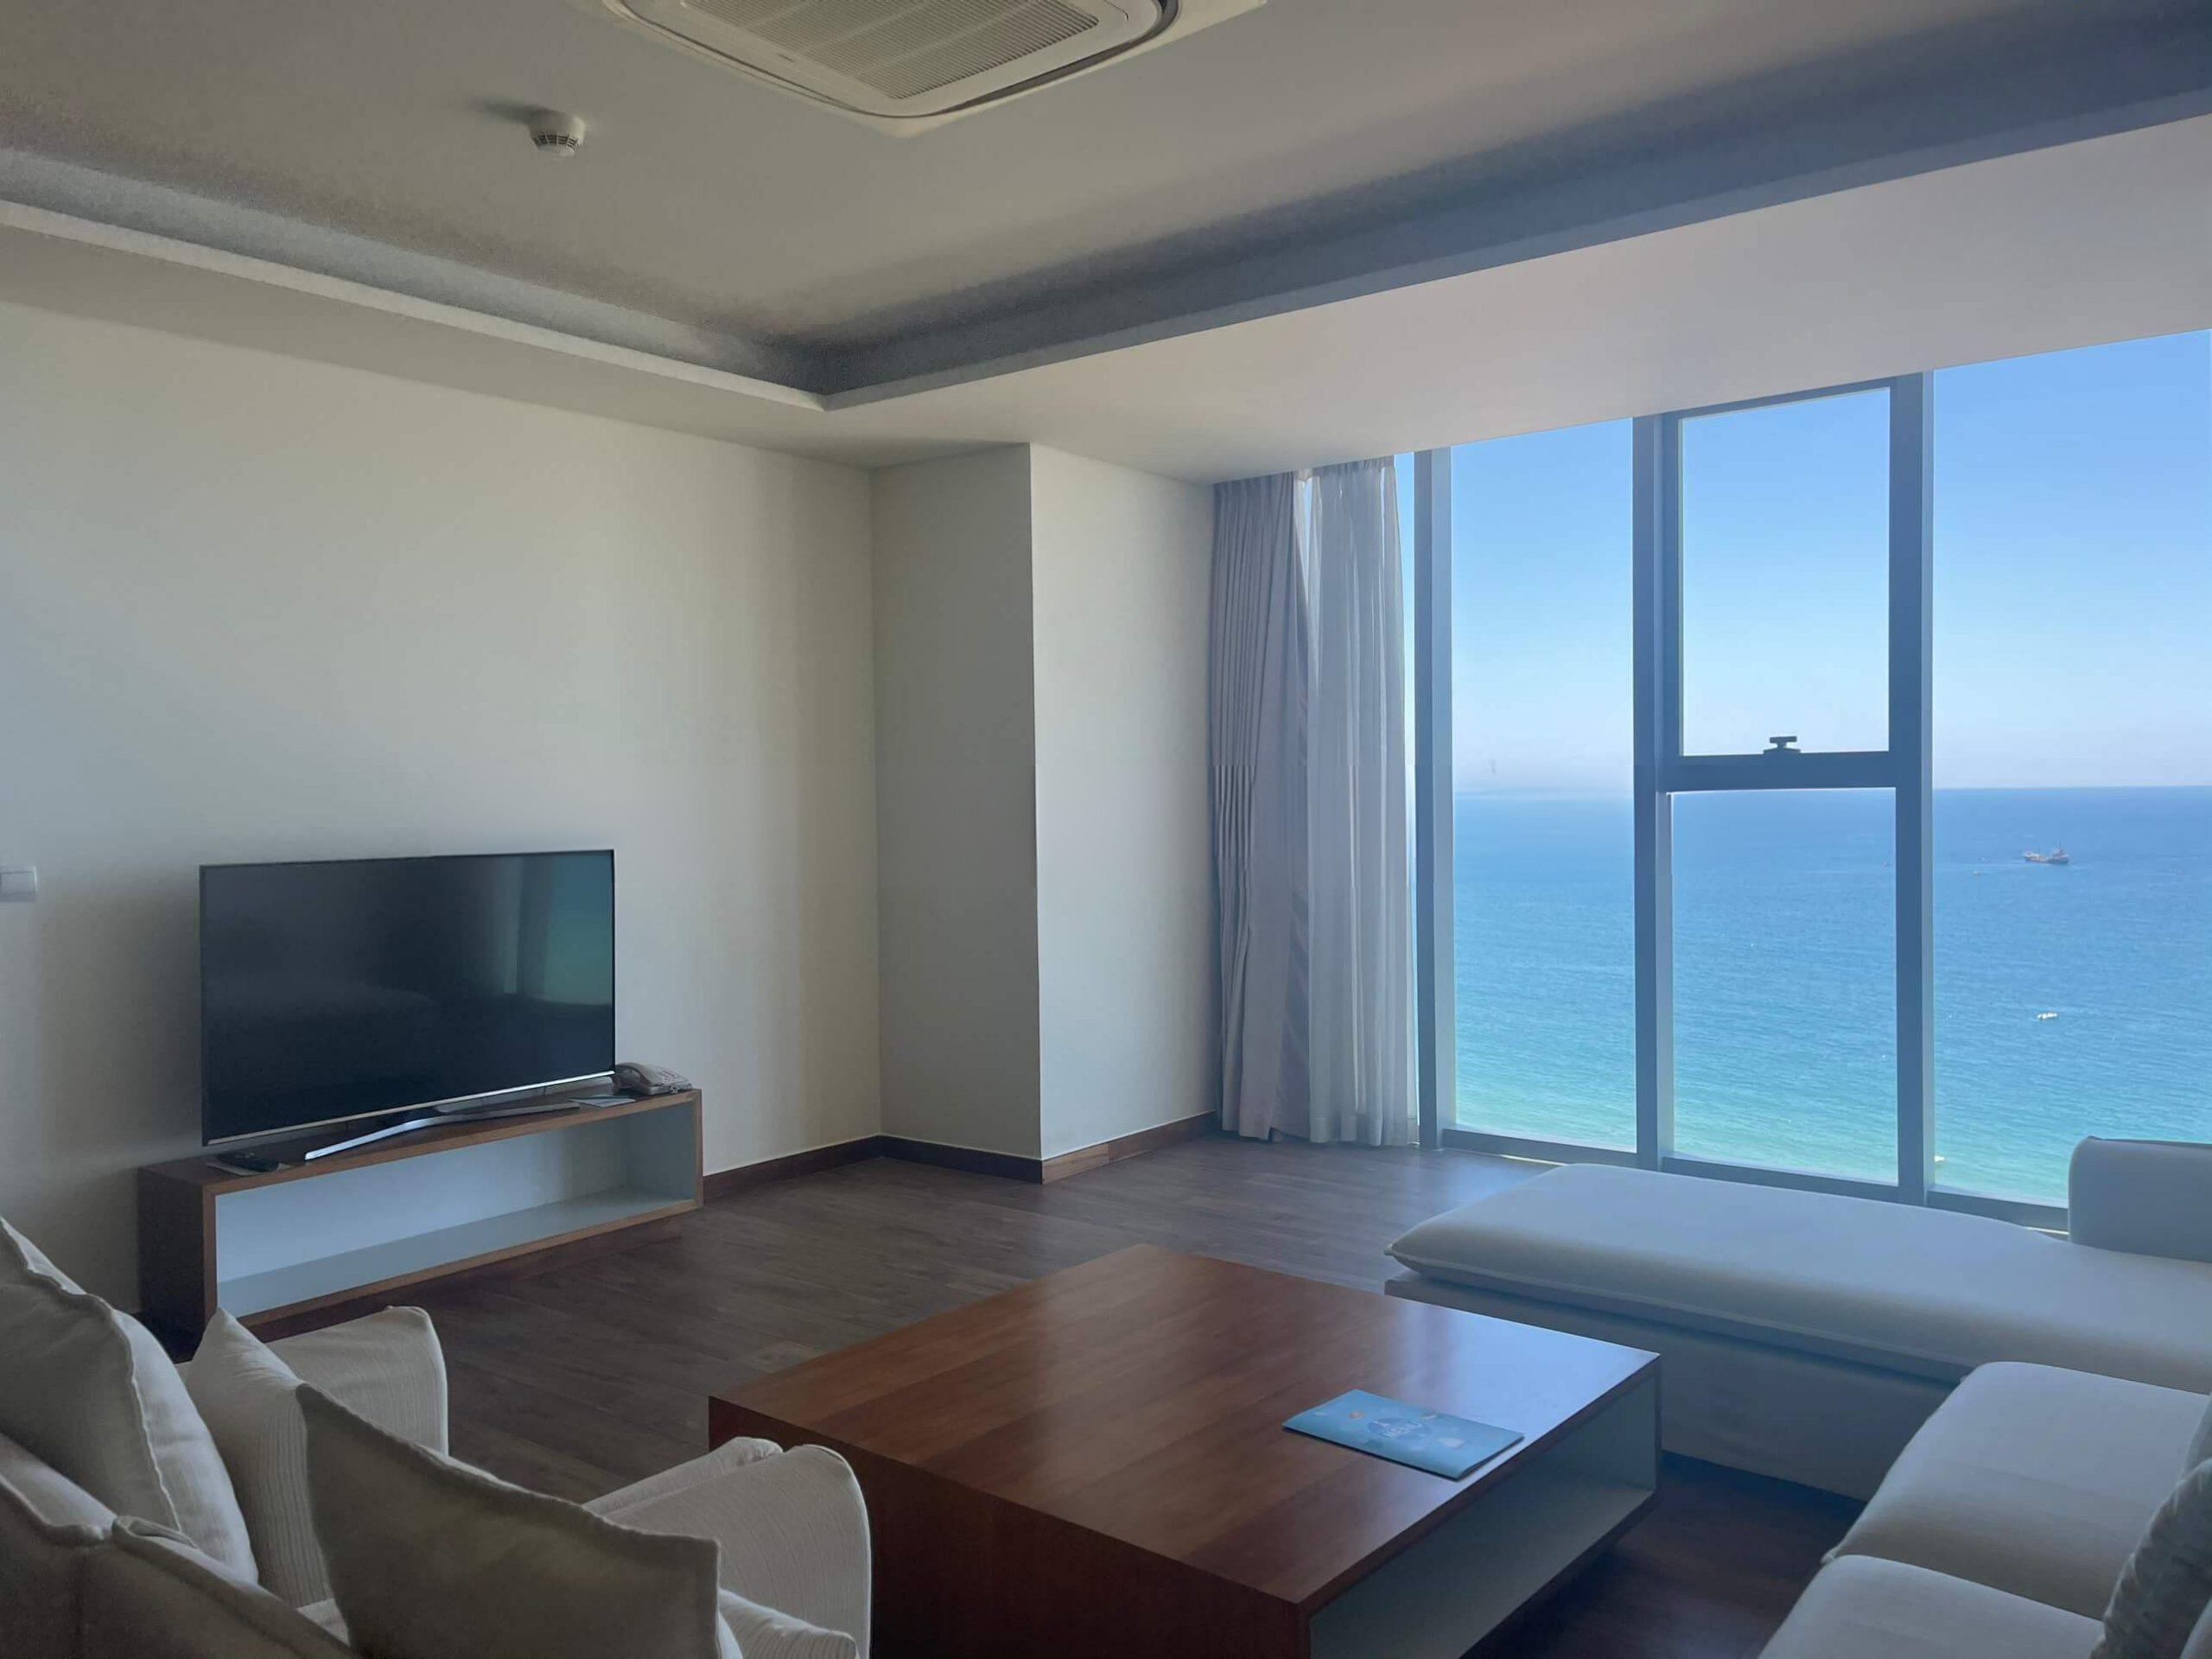 For sale: ALaCarte apartment, 2 bedrooms, direct ocean view in Đà Nẵng.